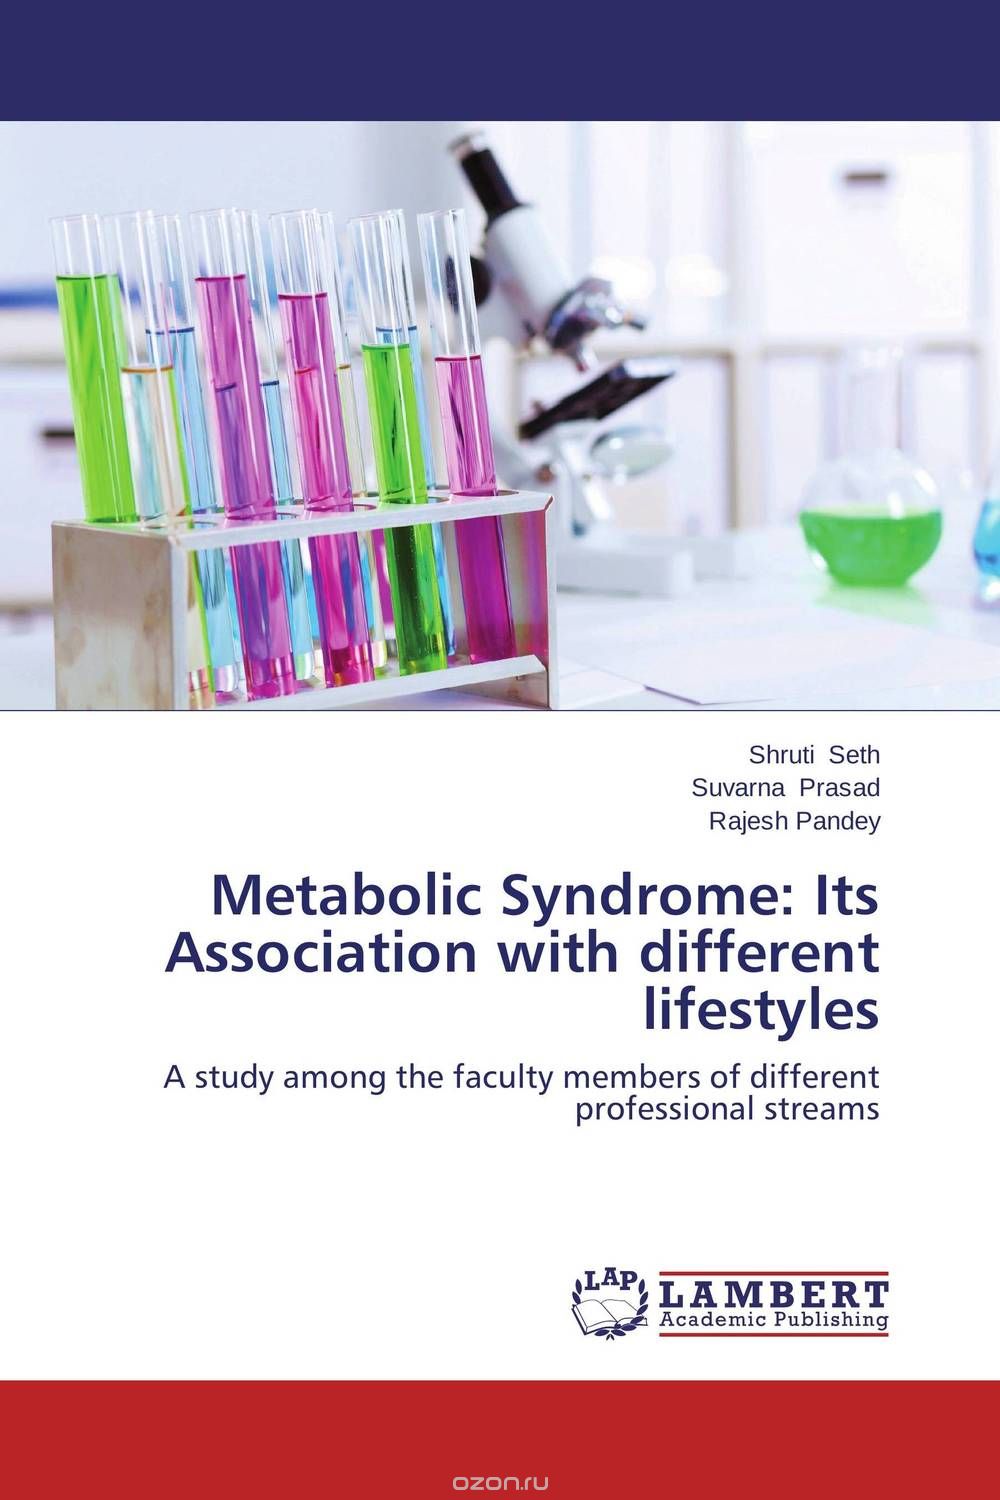 Metabolic Syndrome: Its Association with different lifestyles